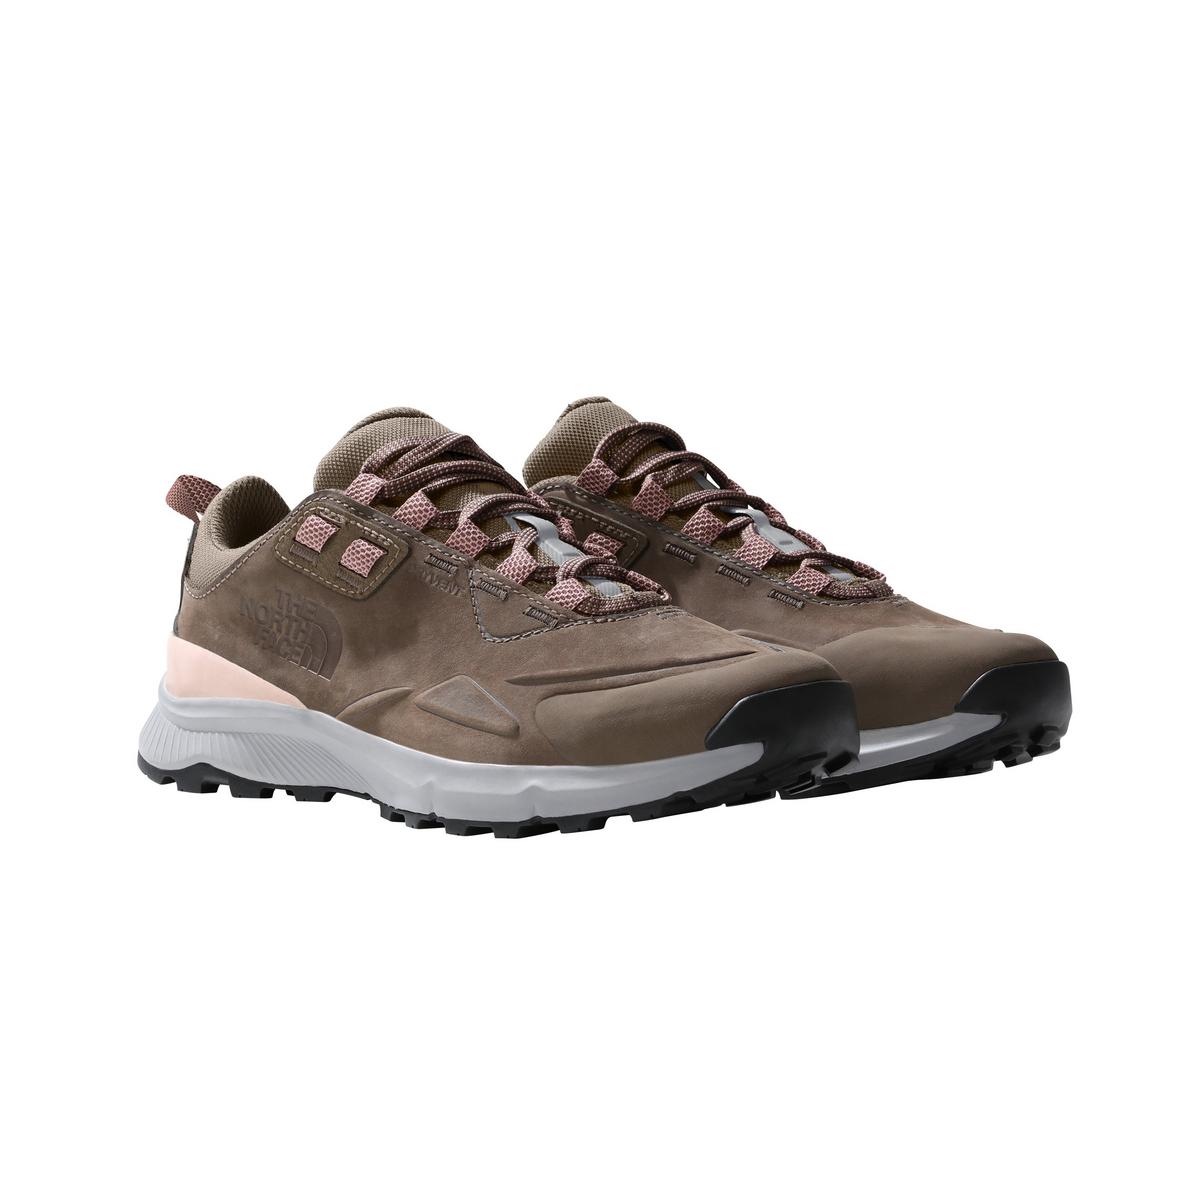 The North Face Women's Cragstone Waterproof Hiking Shoes - Brown